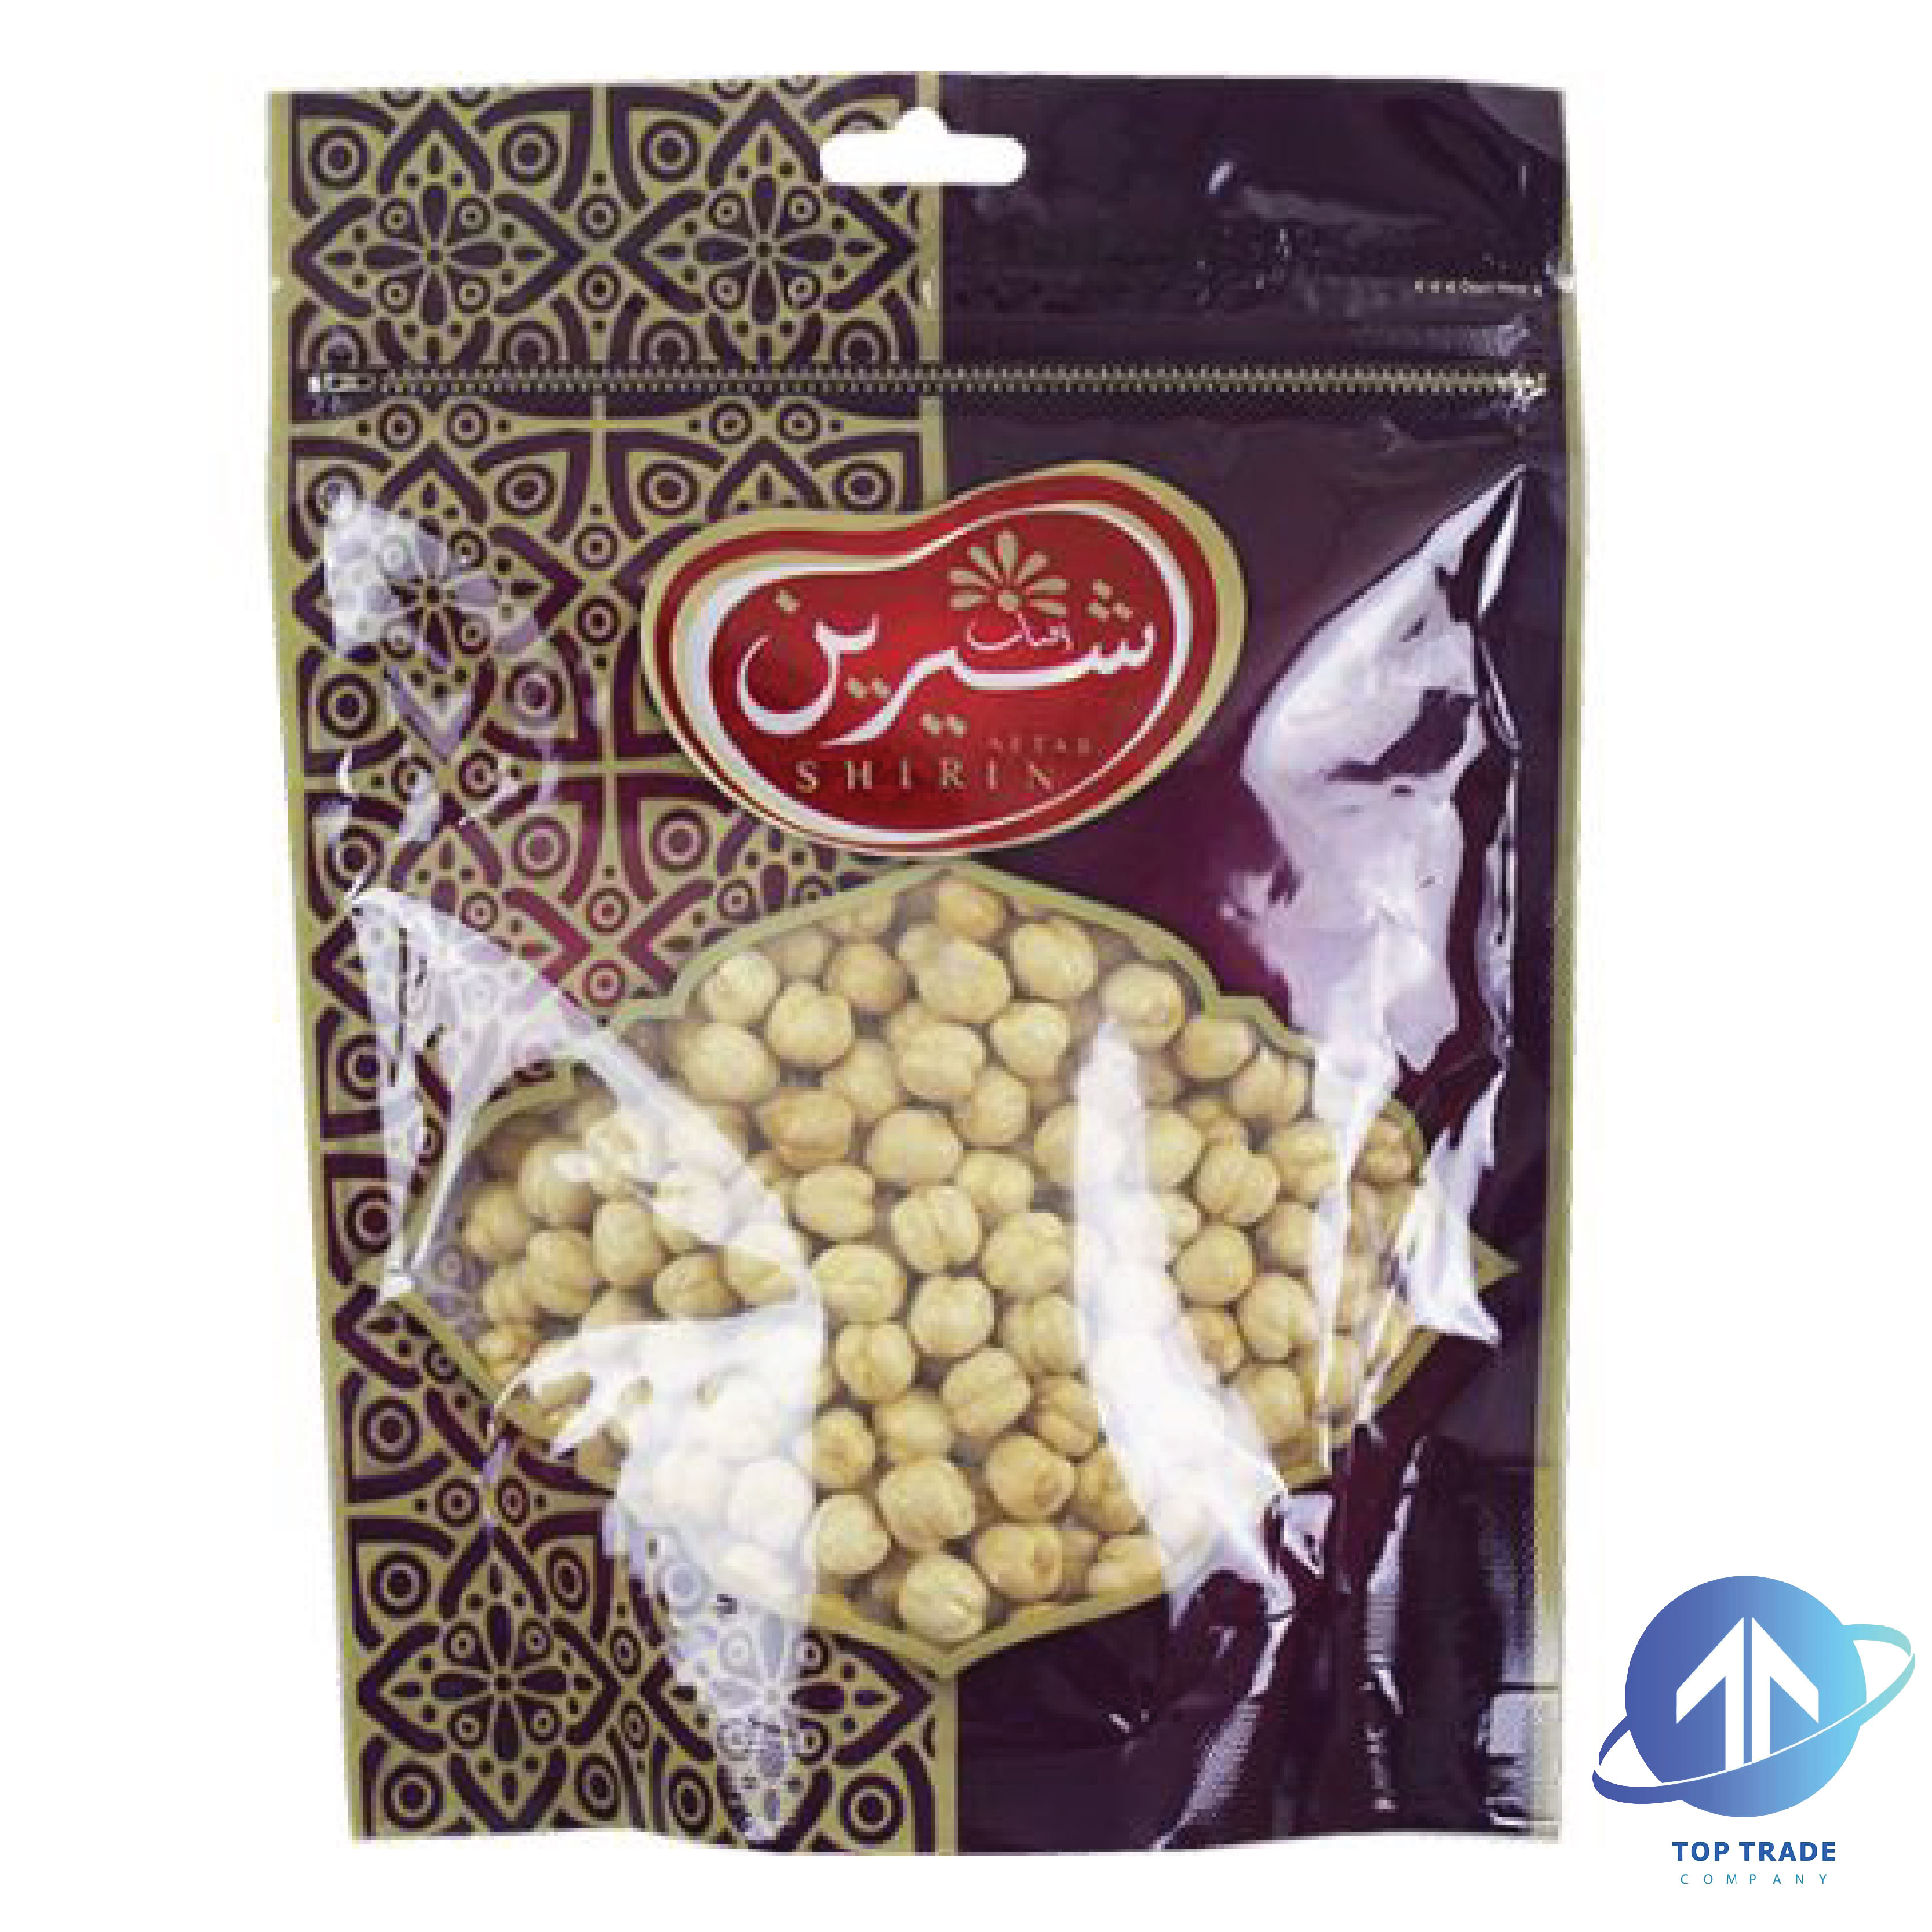 Aftab shirin Unsalted Rosted Chickpeas 200gr